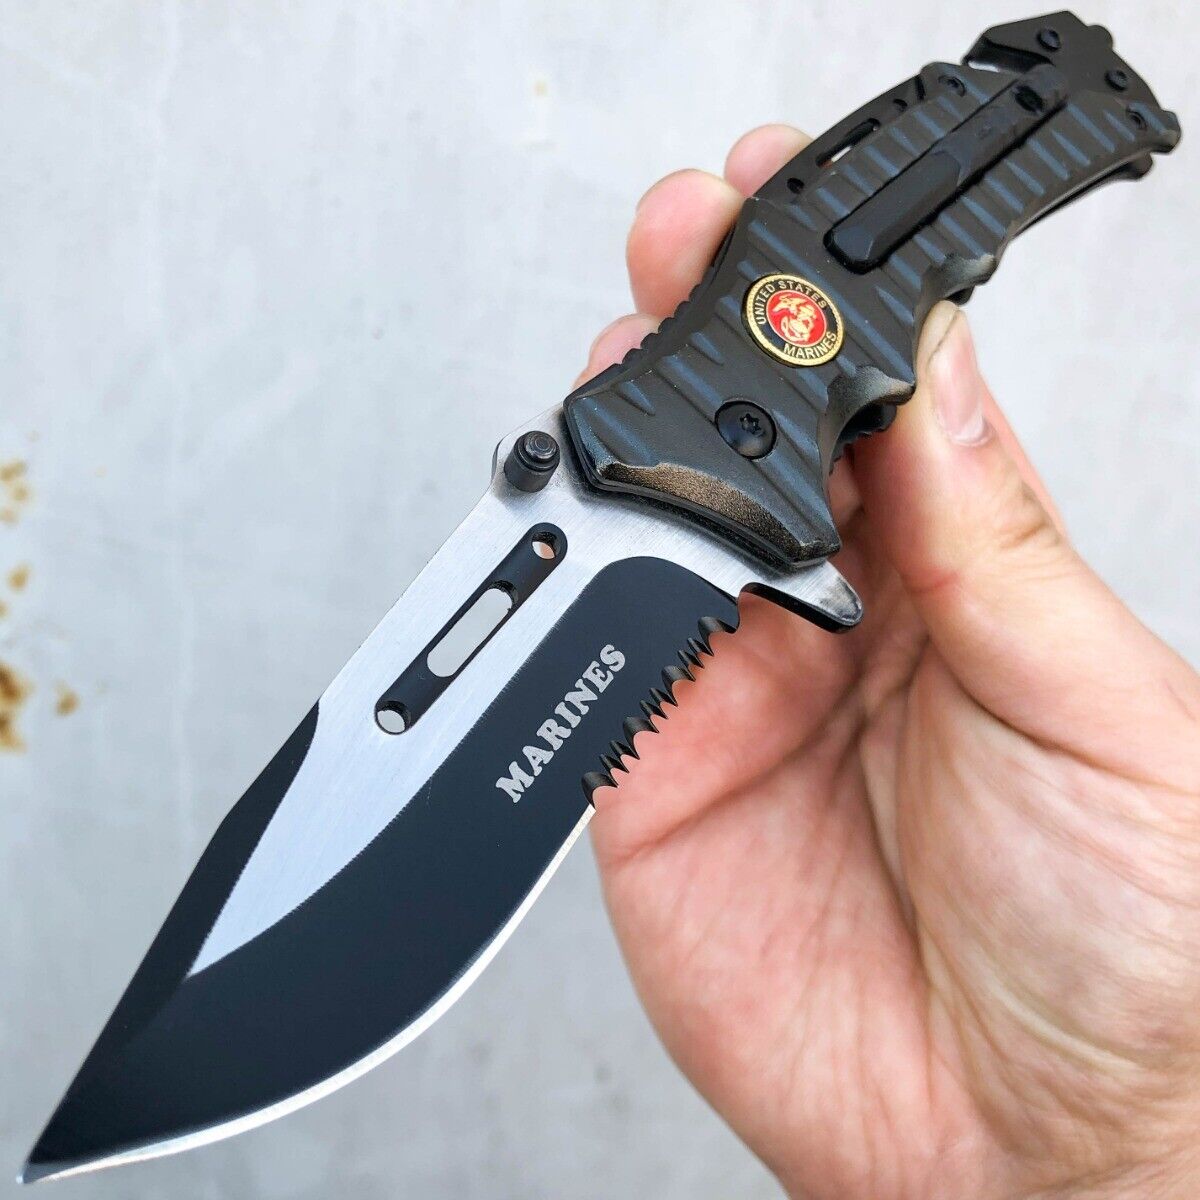 8.25" Military USMC MARINES Assisted Folding Rescue Pocket Knife Multi Tool NEW Defender Does Not Apply - фотография #2